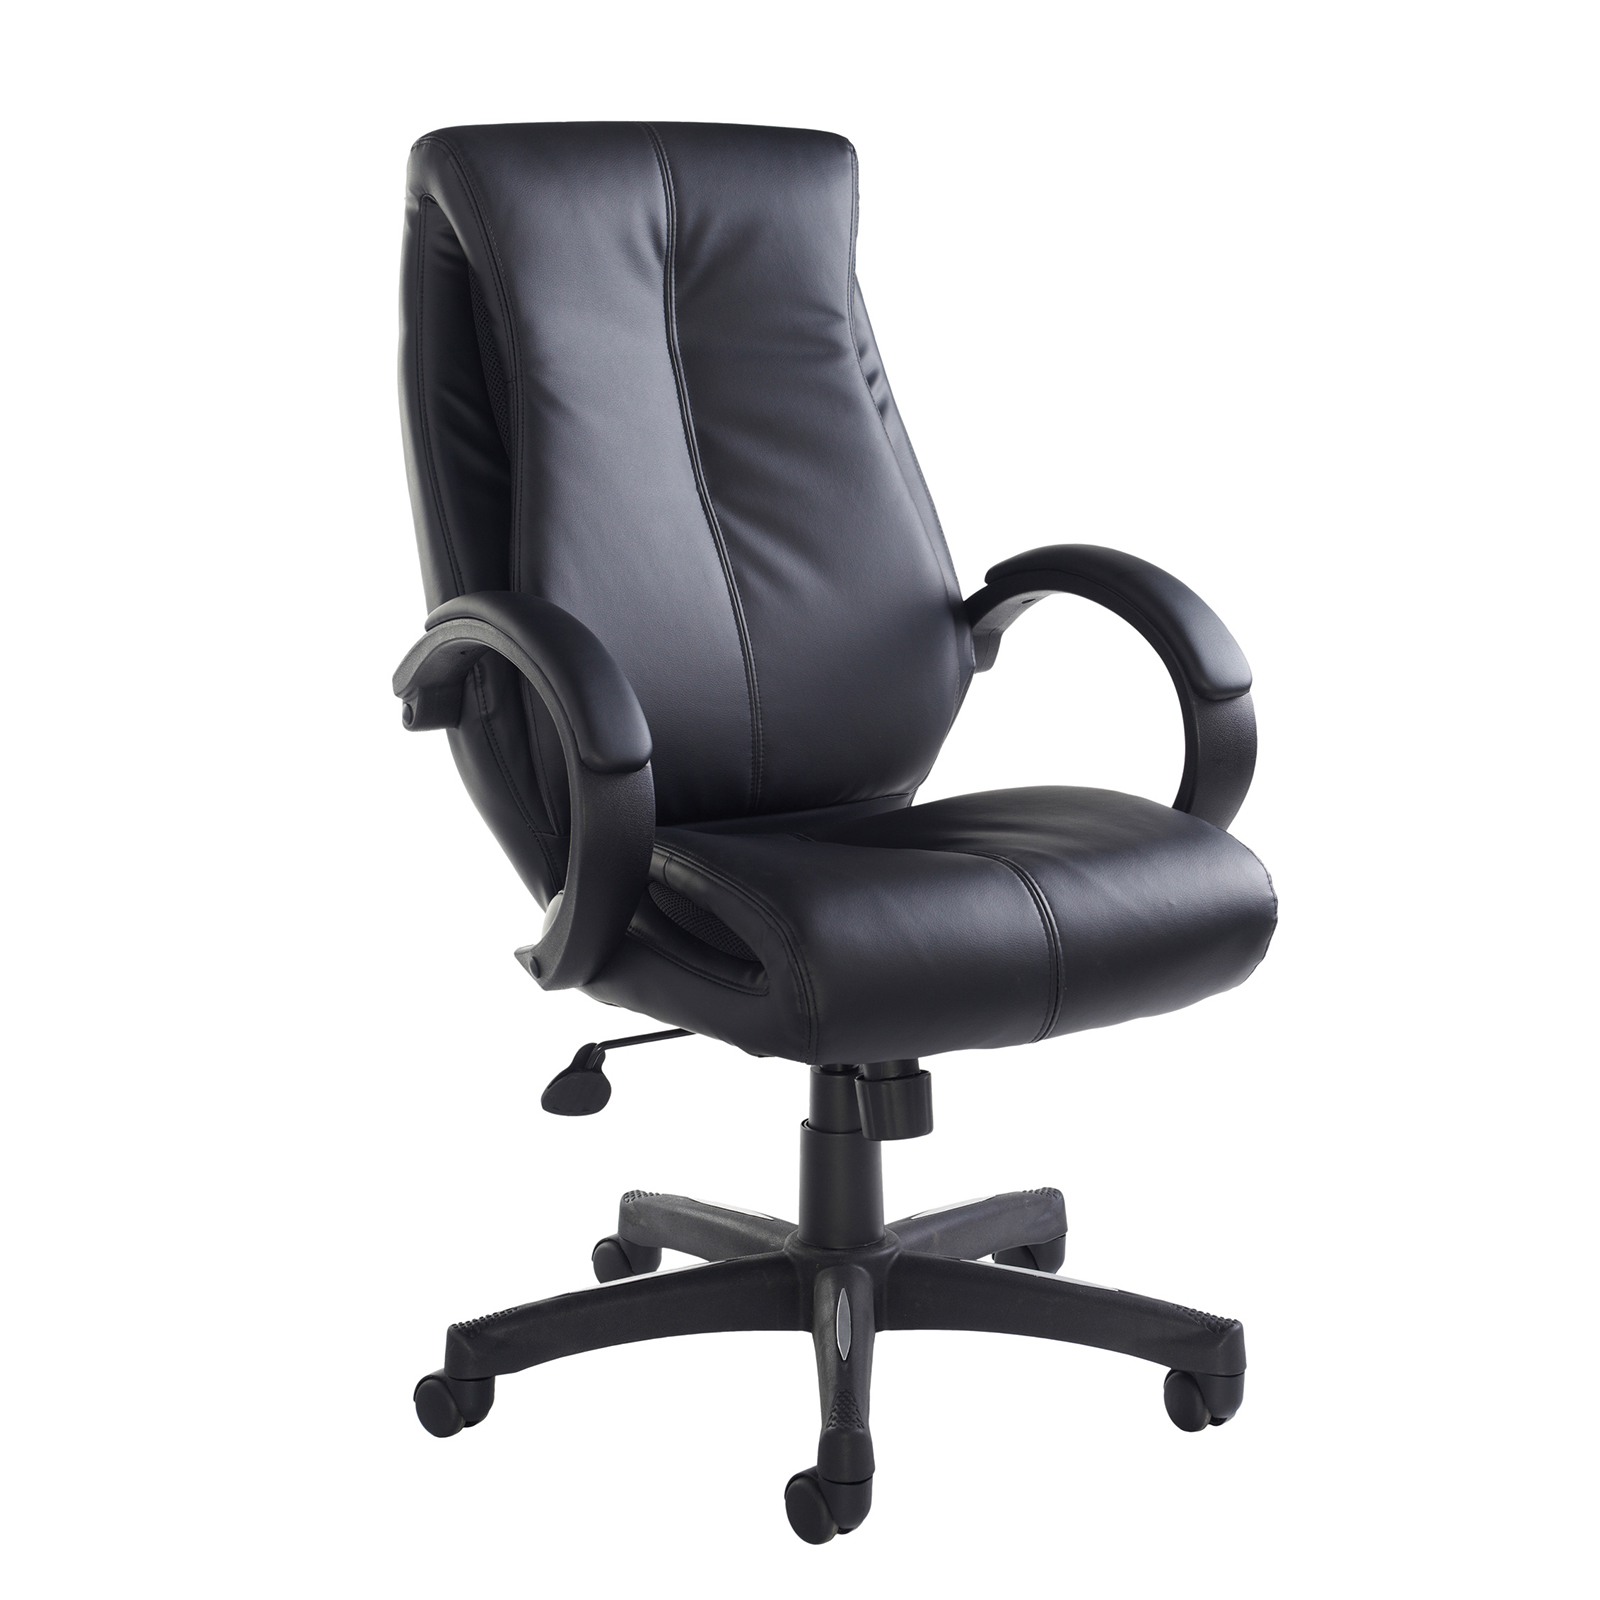 Executive Chairs Nantes high back managers chair - black faux leather